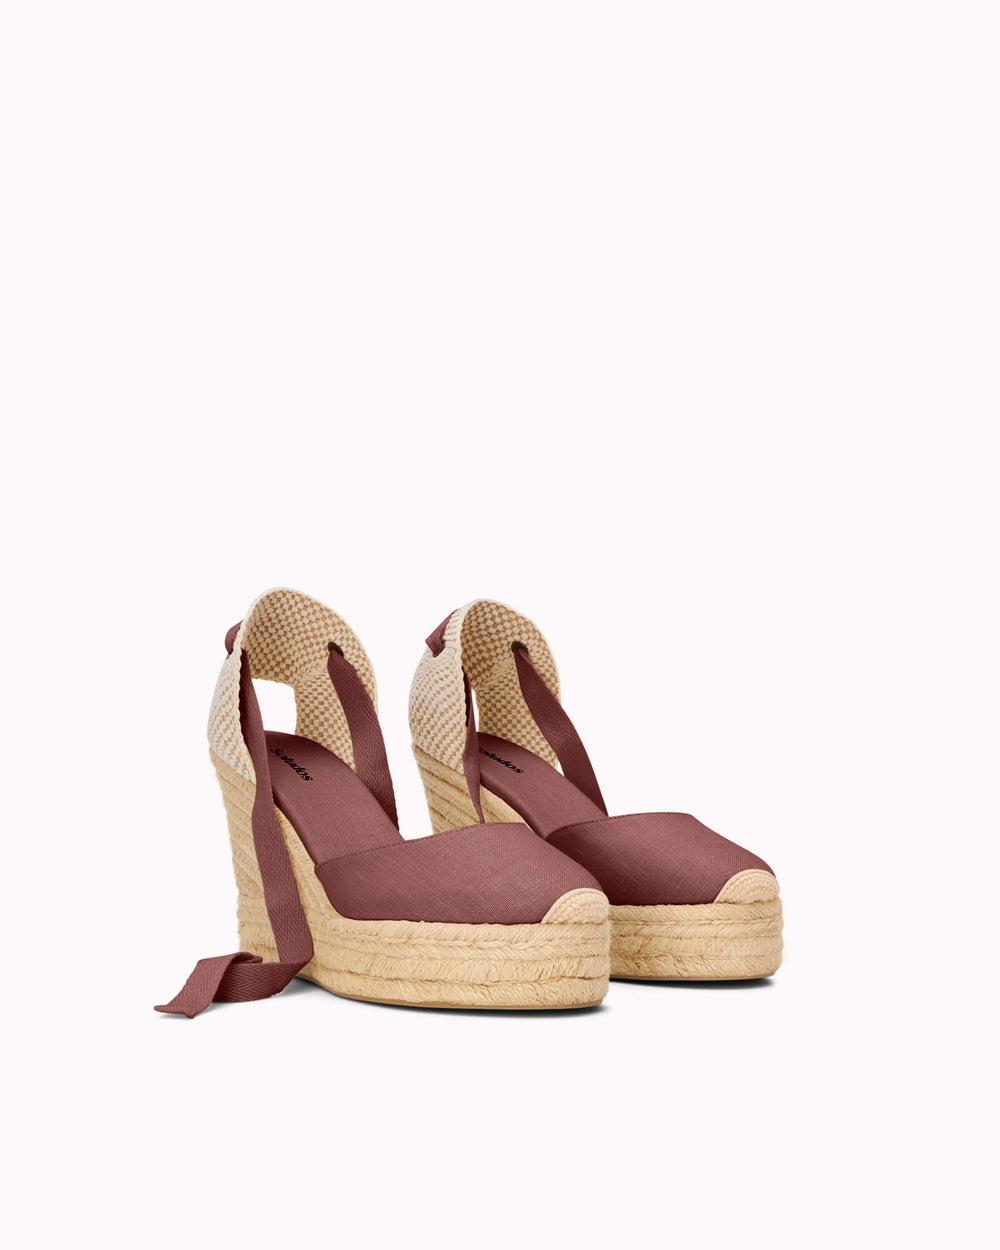 The Platform Wedge - Classic - Castano Brown